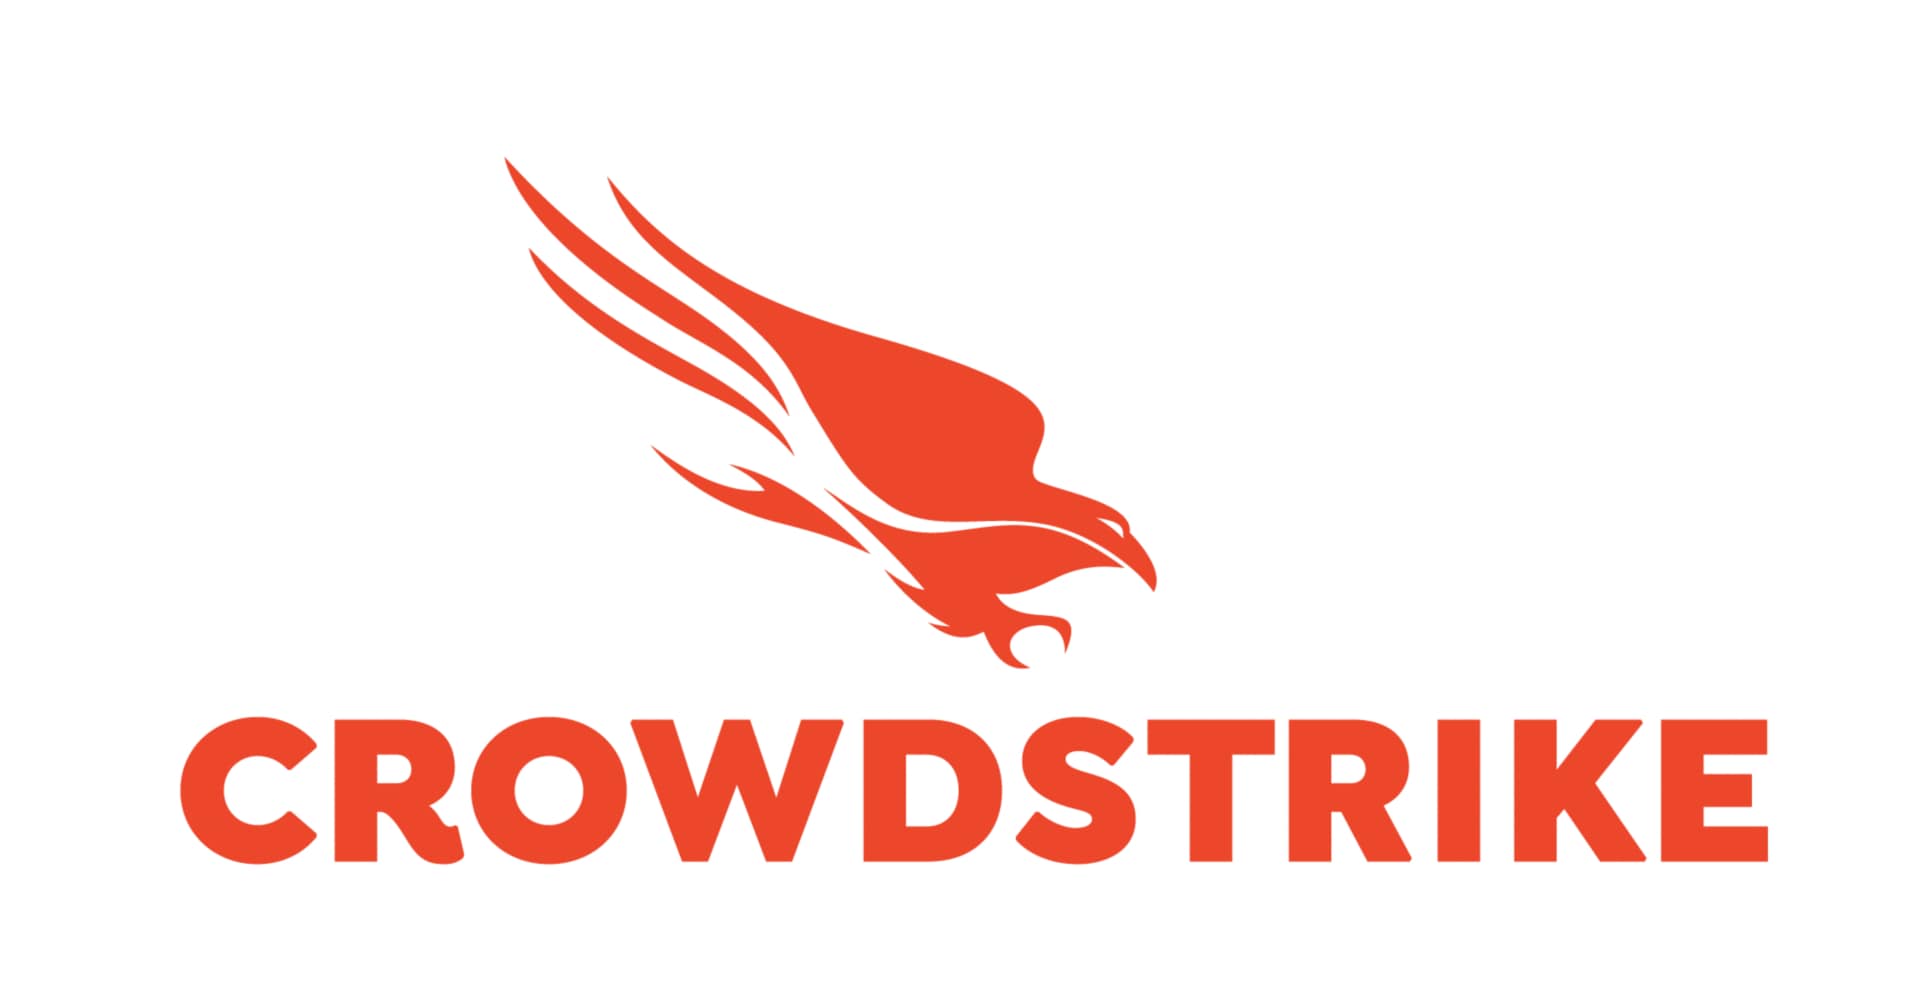 CrowdStrike 12-Month Falcon Insight XDR Native Connector, 7 Day Retention